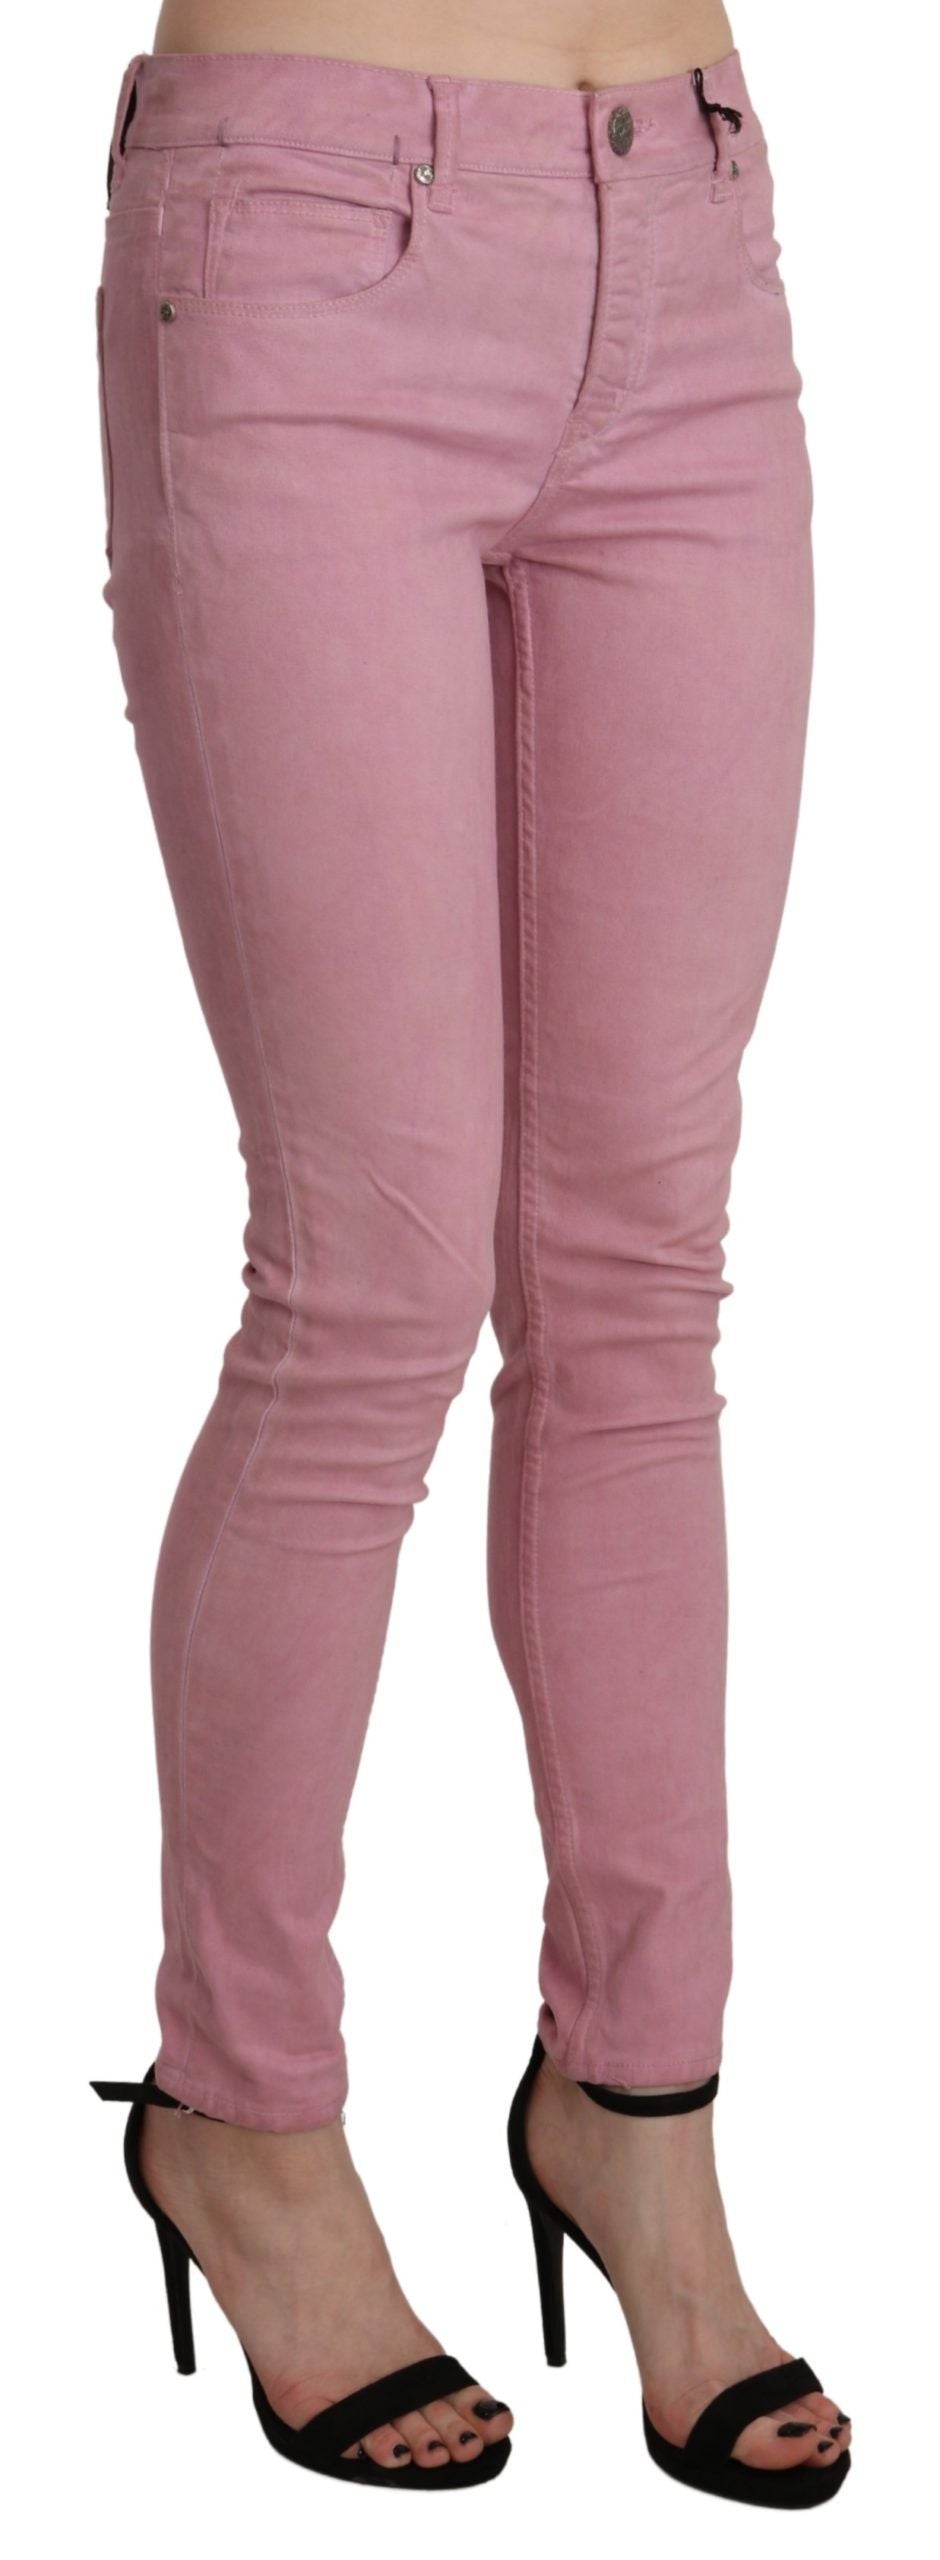 Acht Chic Pink Mid Waist Skinny Jeans